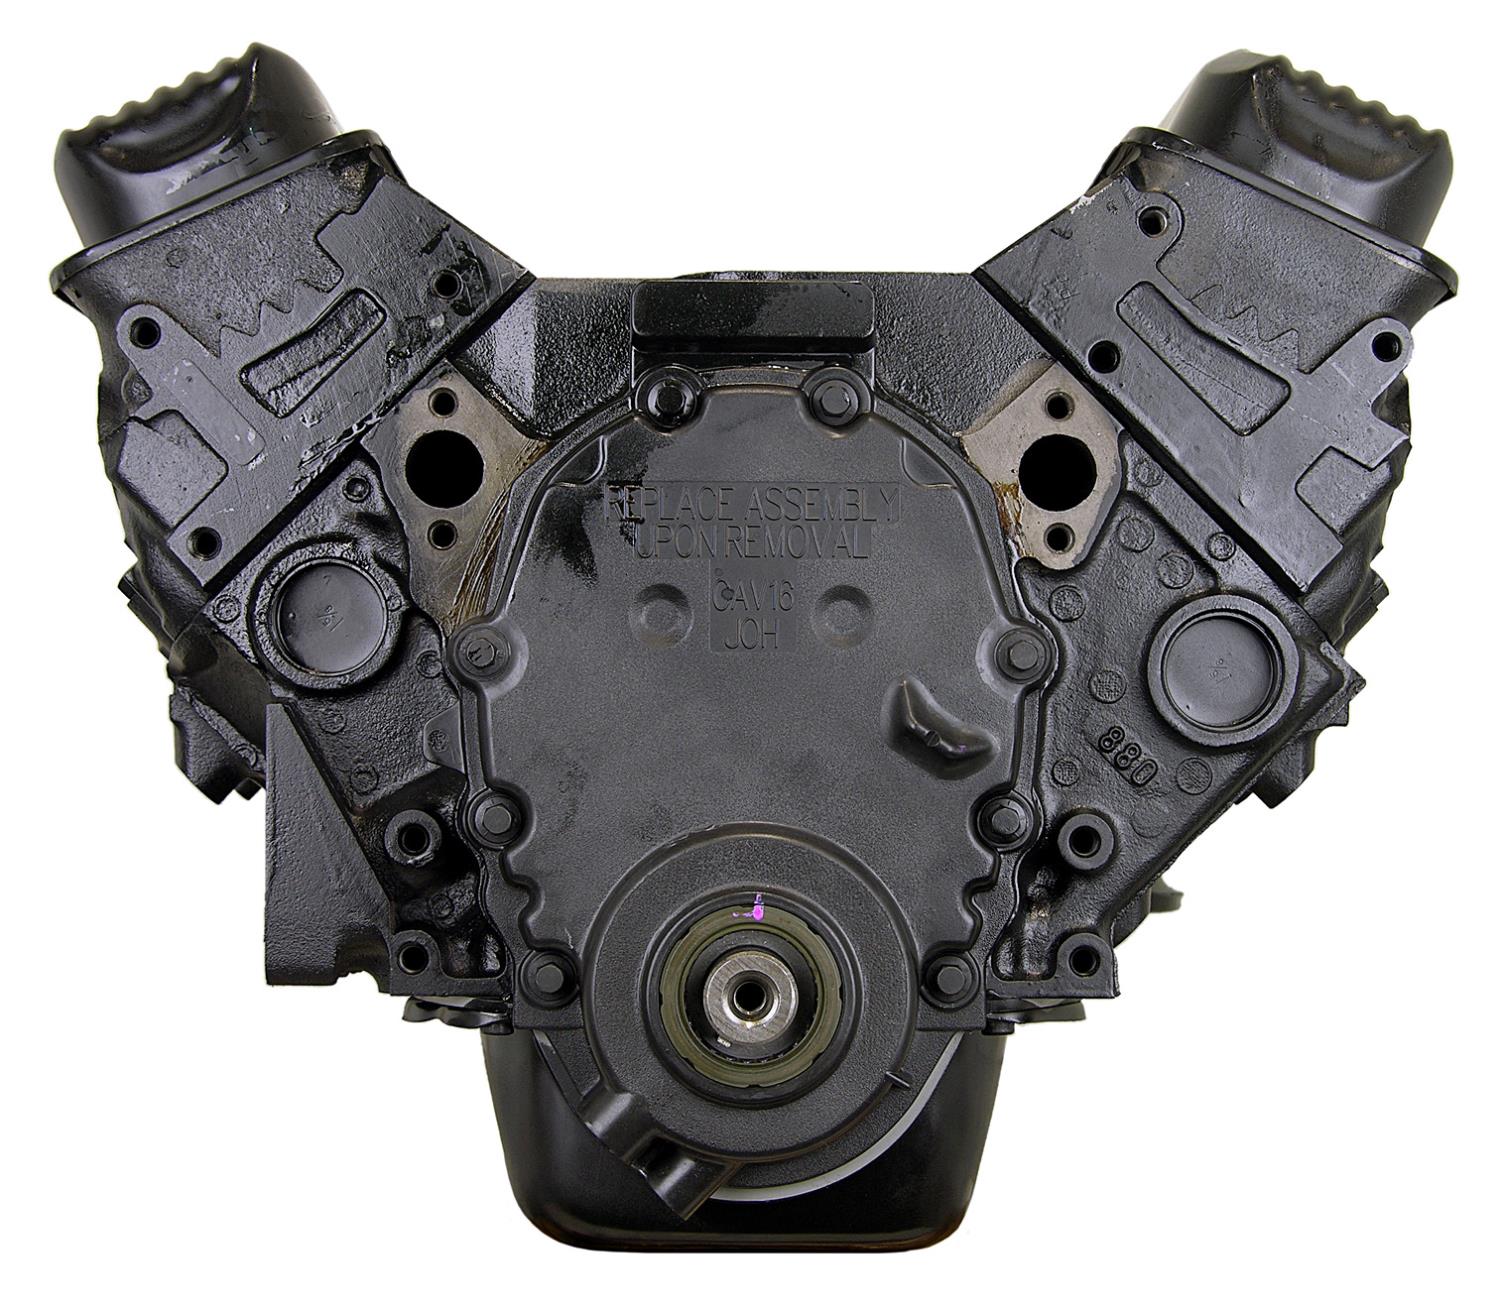 VCH4 Remanufactured Crate Engine for 1996-2000 Chevy & GMC C/K Truck, SUV, & Van with 350ci/5.7L V8